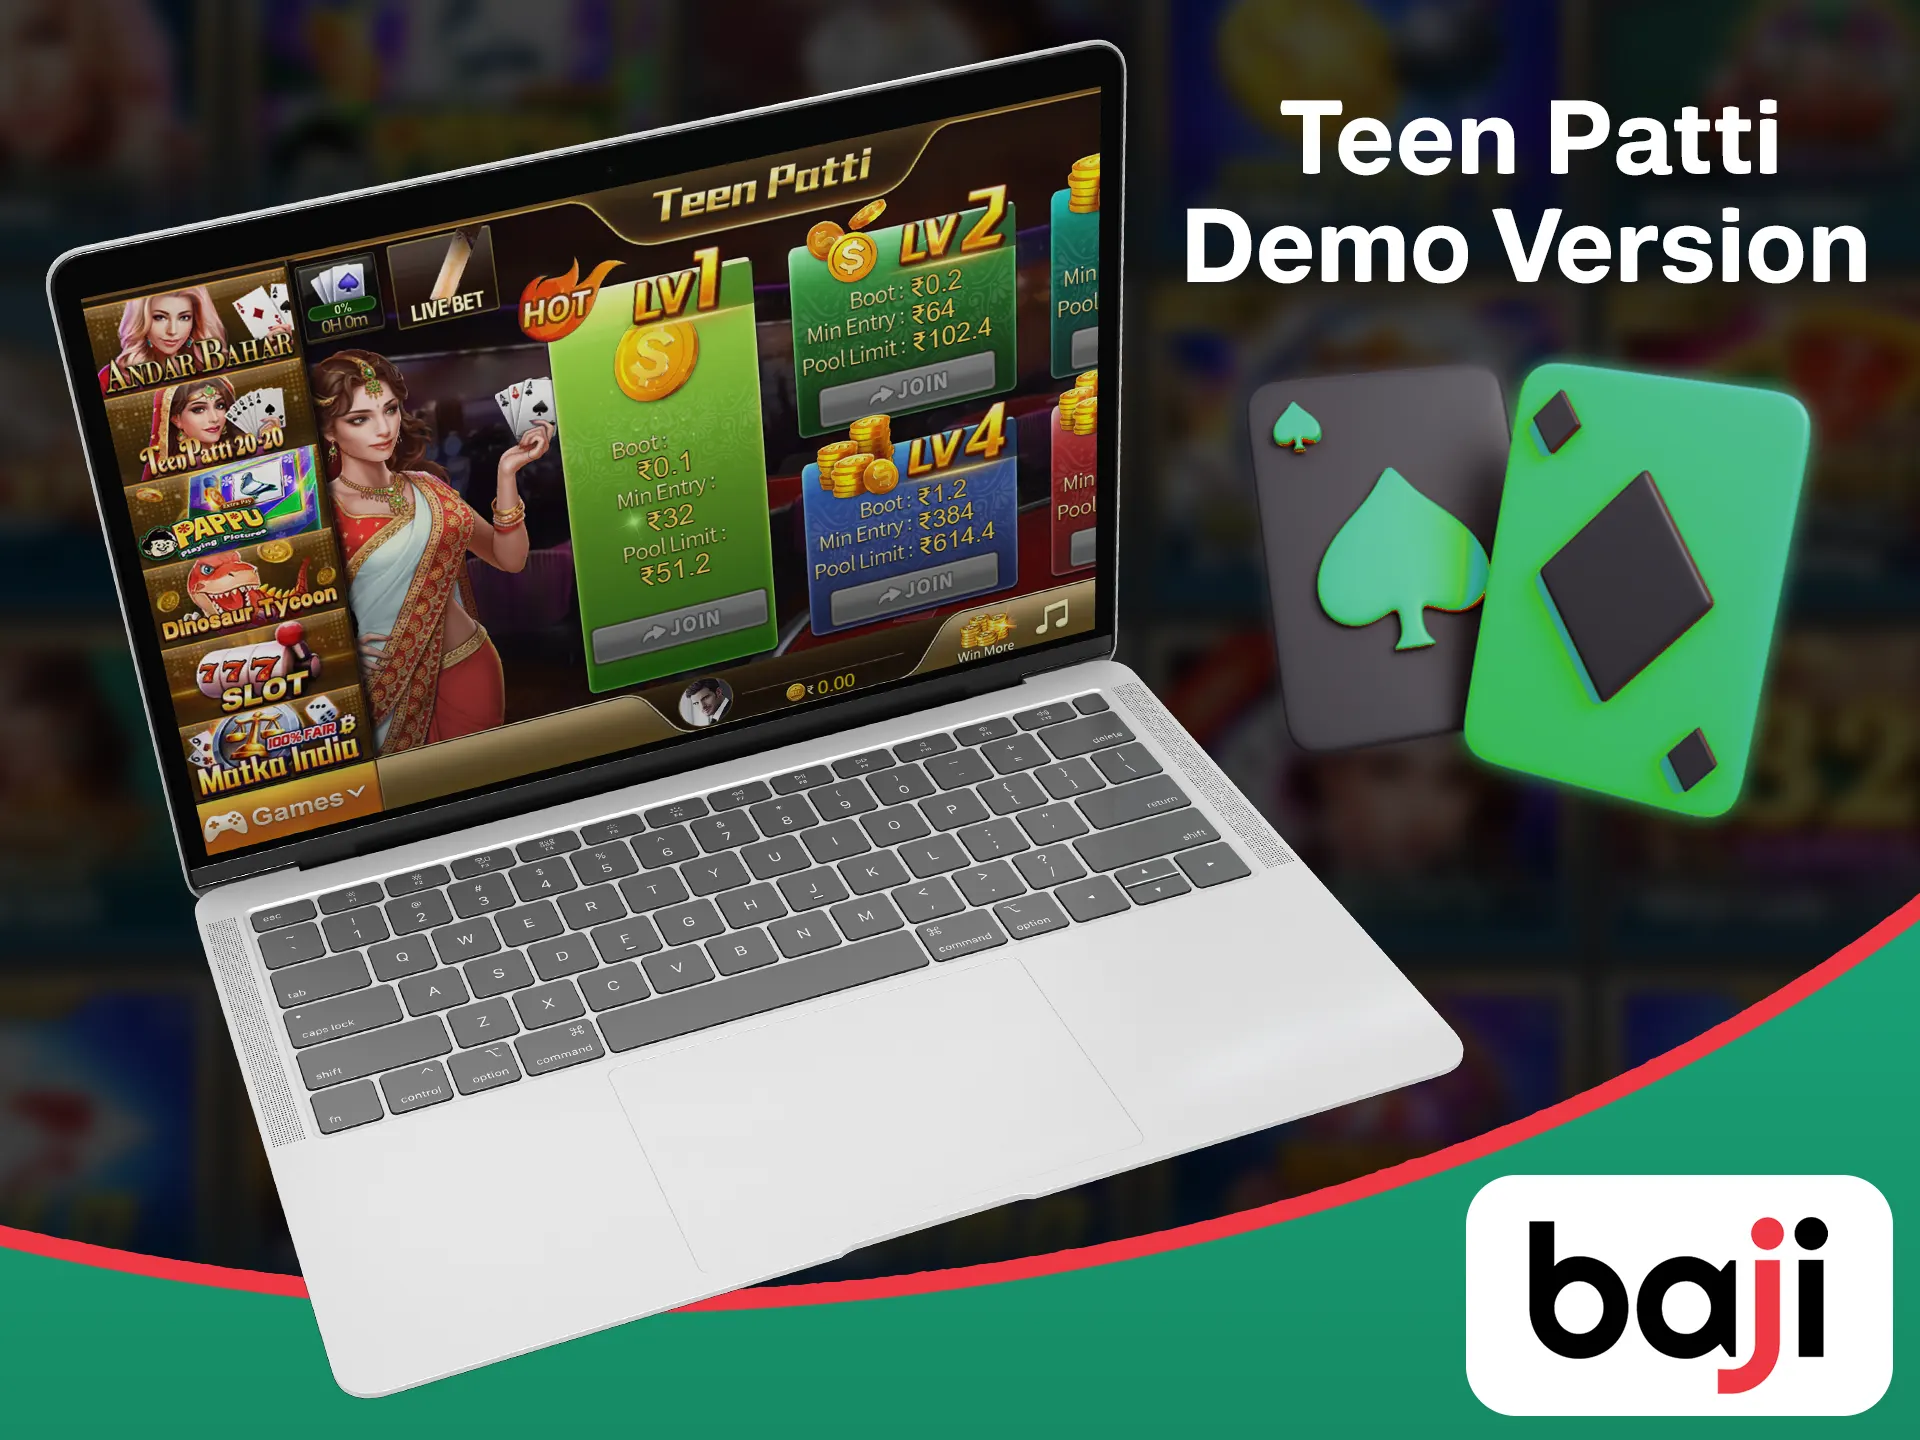 Try teen patti games in demo mode at the Baji.